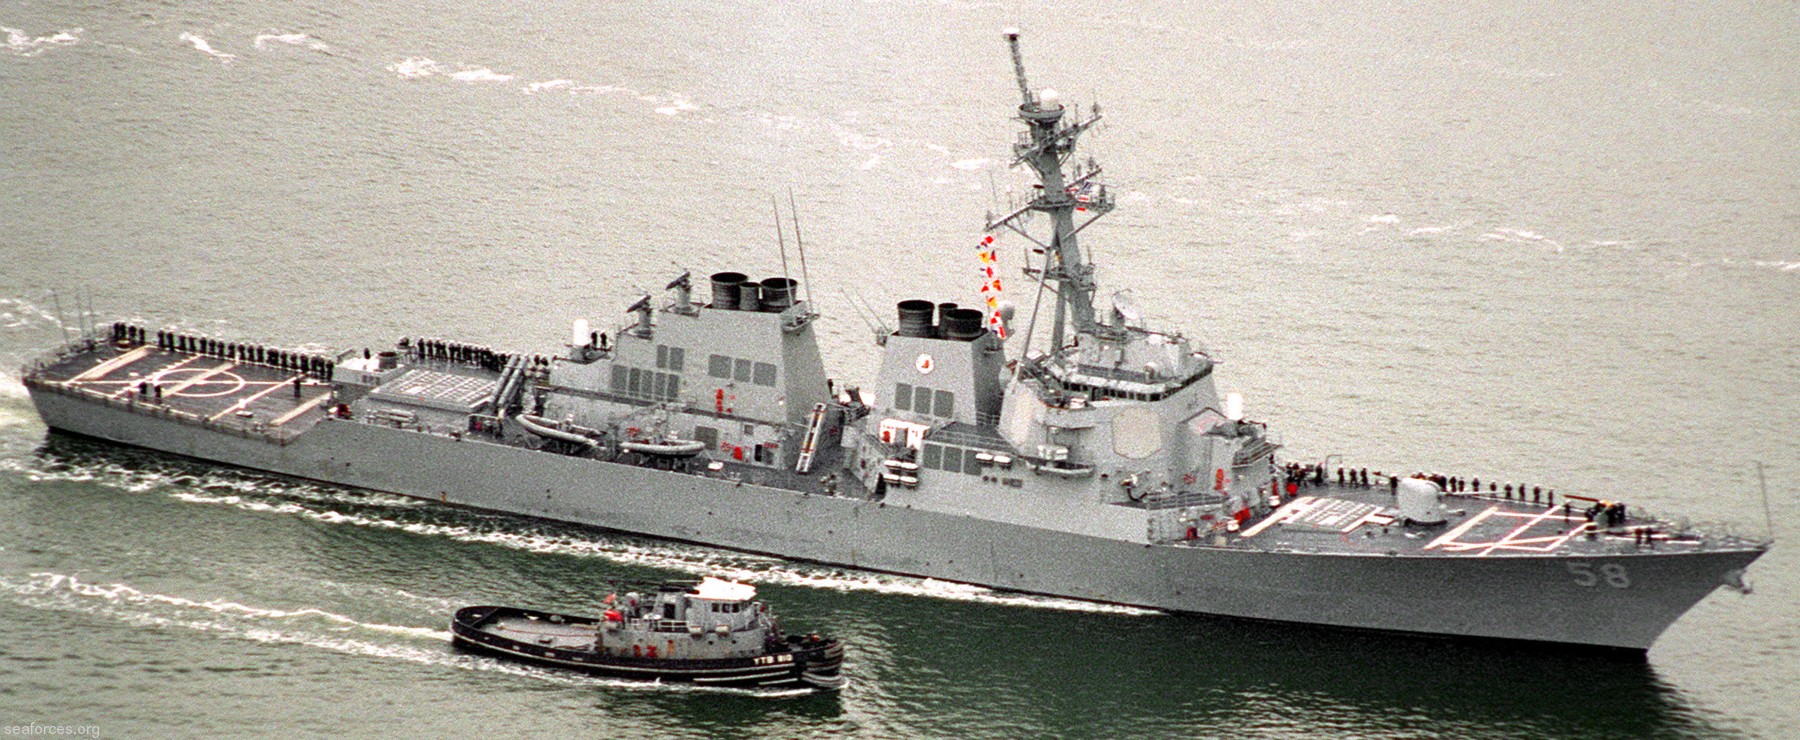 ddg-58 uss laboon guided missile destroyer us navy 80